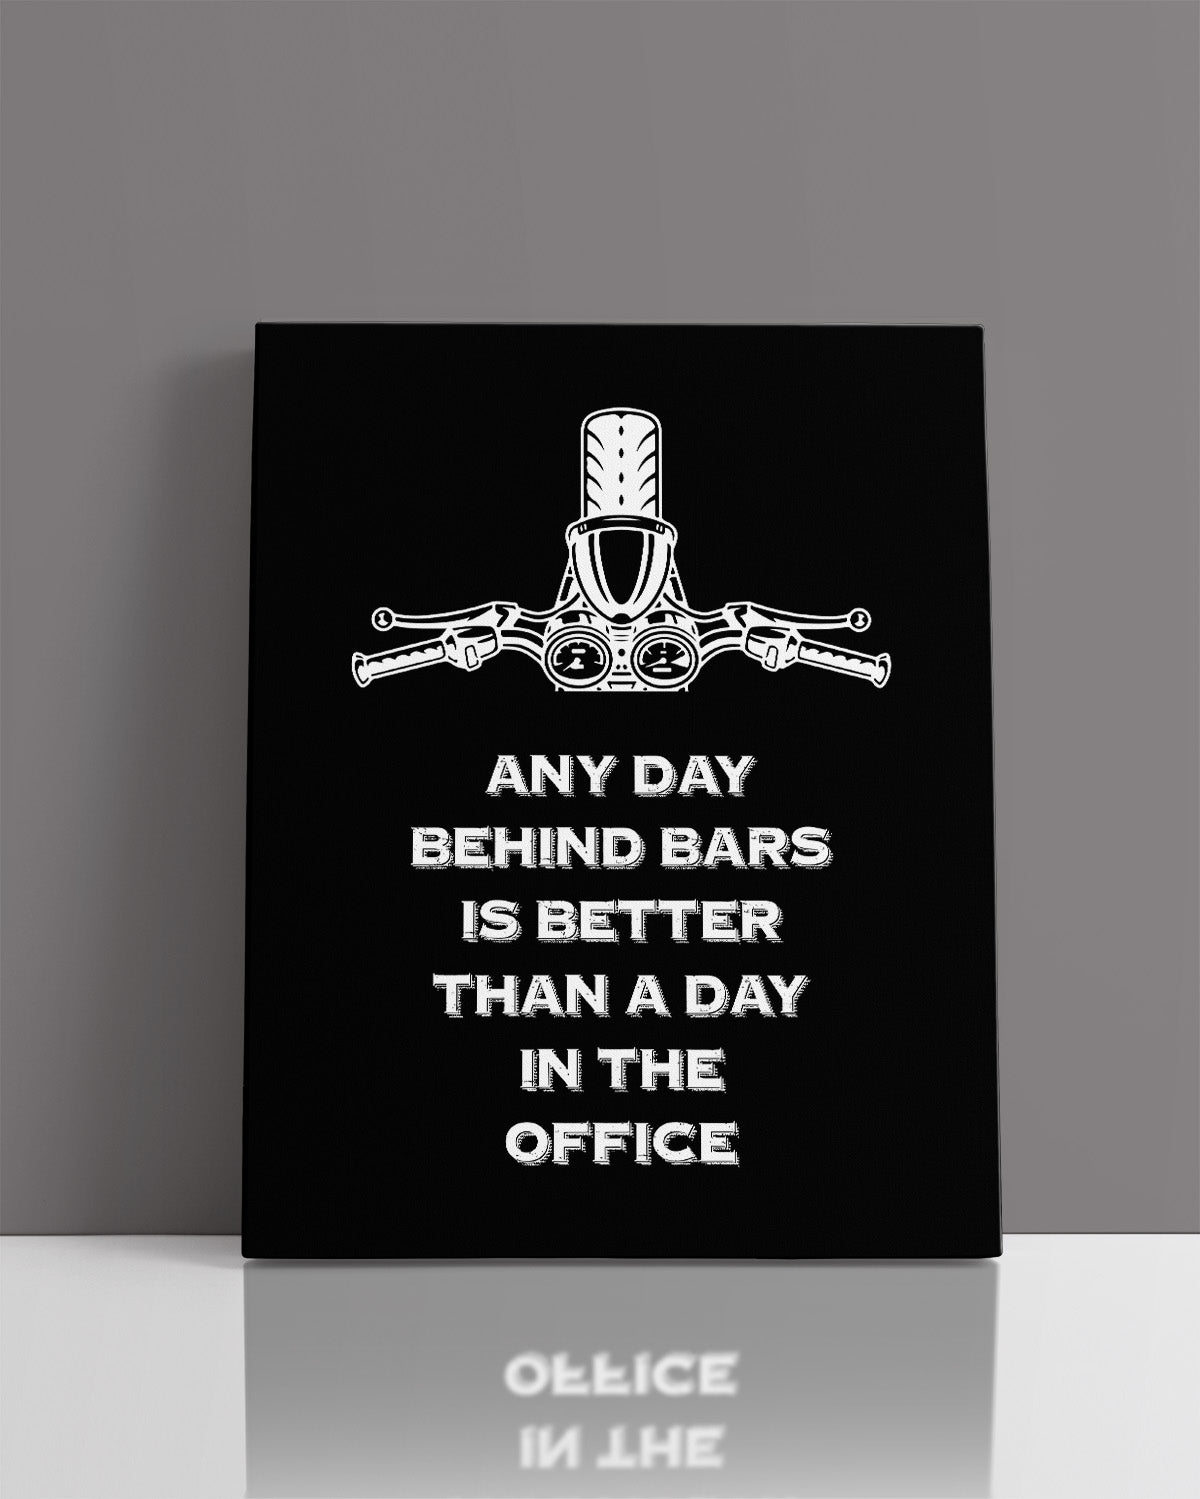 Any Day Behind Bars Is Better Than A Day In The Office - Motorcycle Wall Decor Art Print On A Black Background